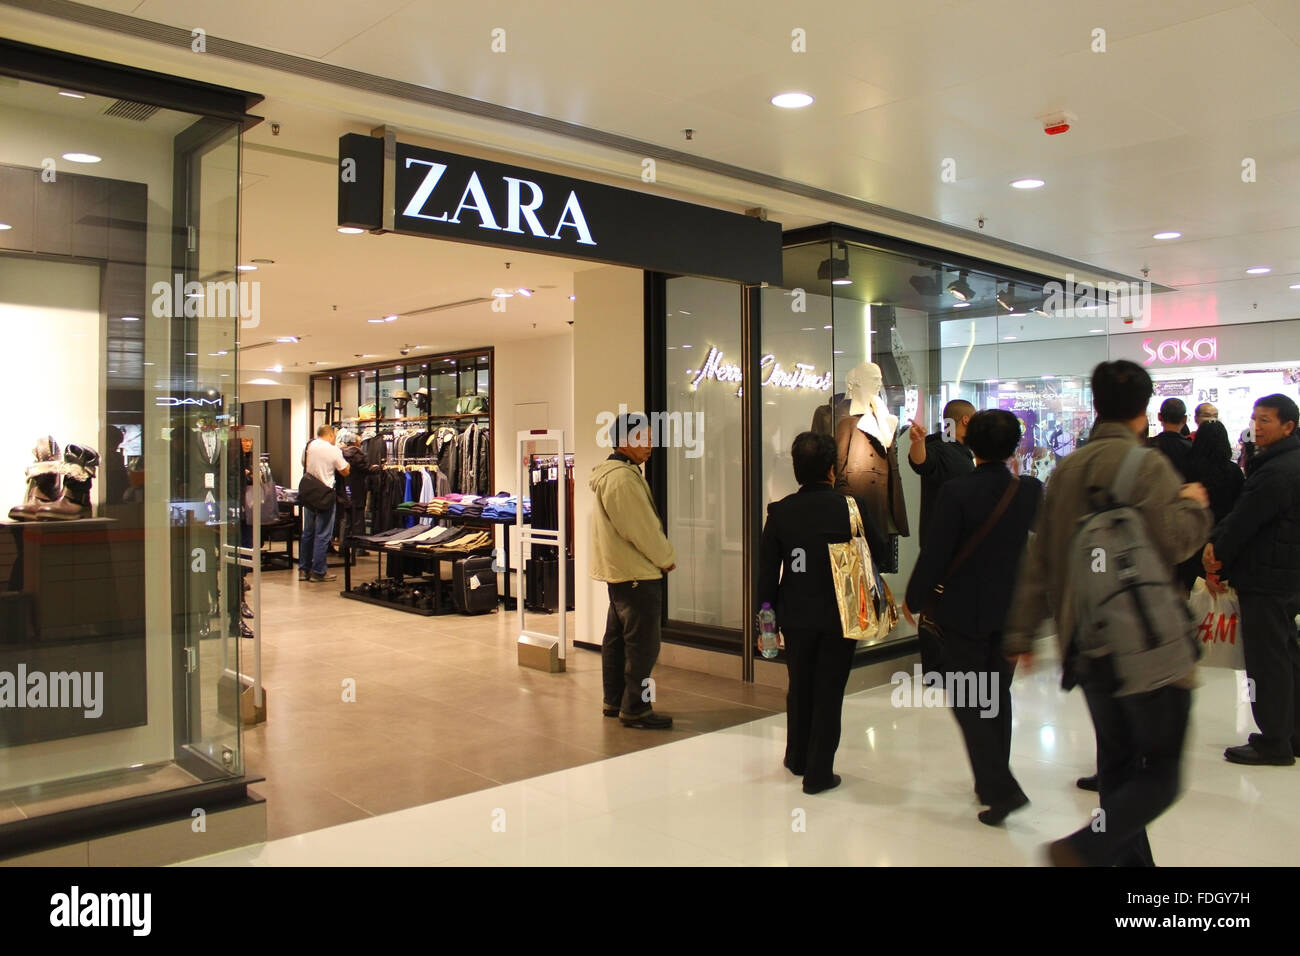 HONG KONG - DEC 22, Zara opens a shop in Tuen Mun, Hong Kong on 22  Decemeber, 2011. There are many people shopping there Stock Photo - Alamy